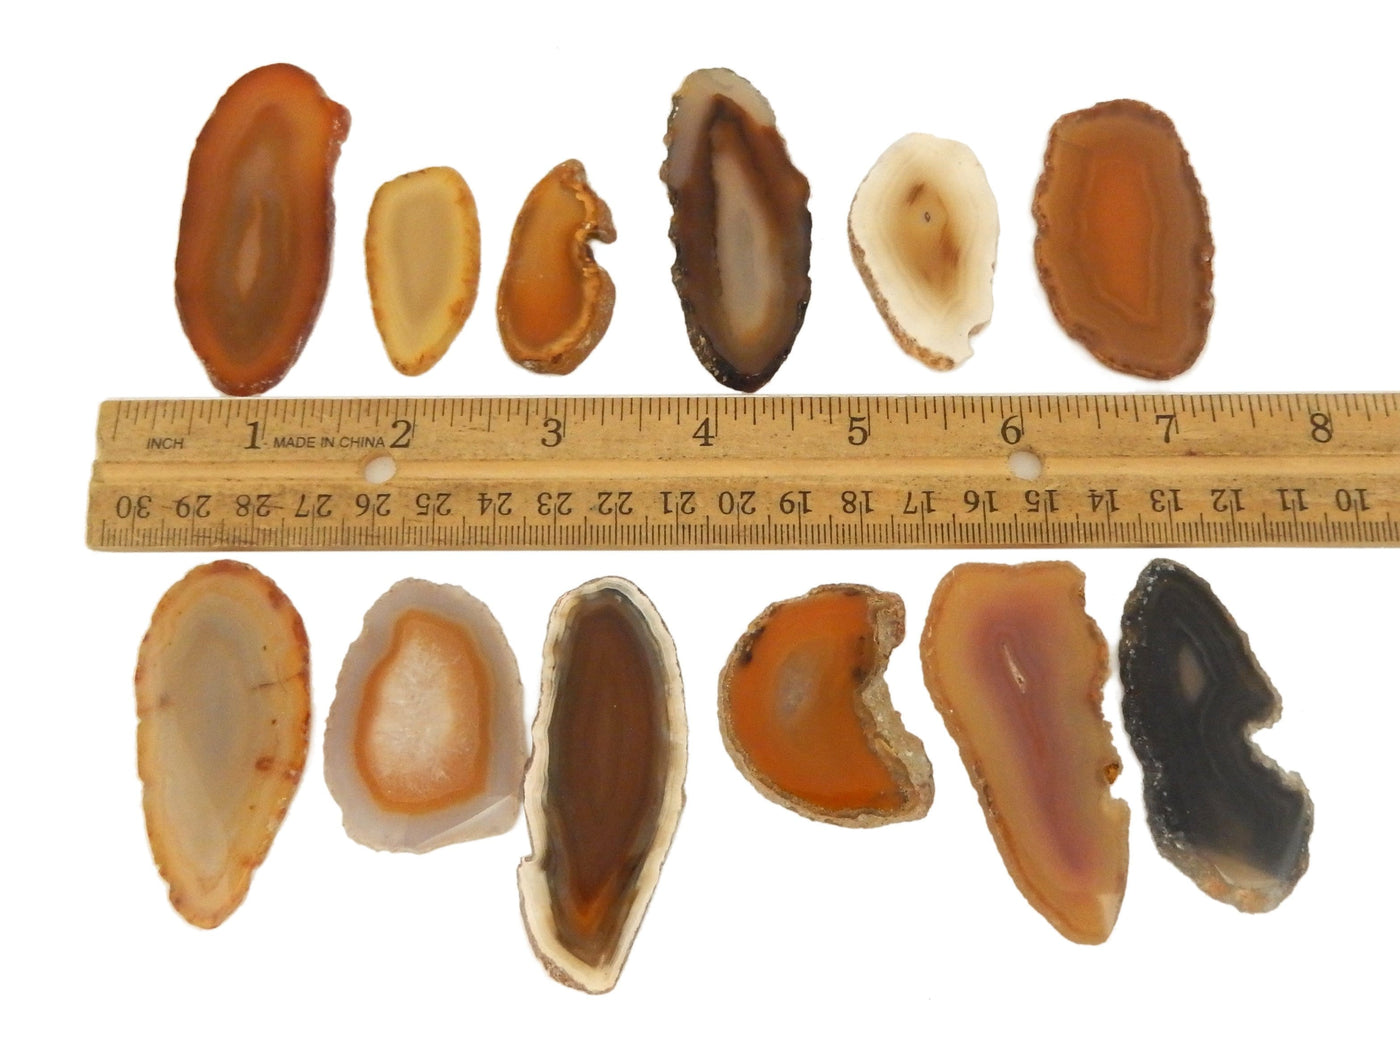 This Picture is showing the agate slices being displayed on a white back ground, next to a ruler for size reference.